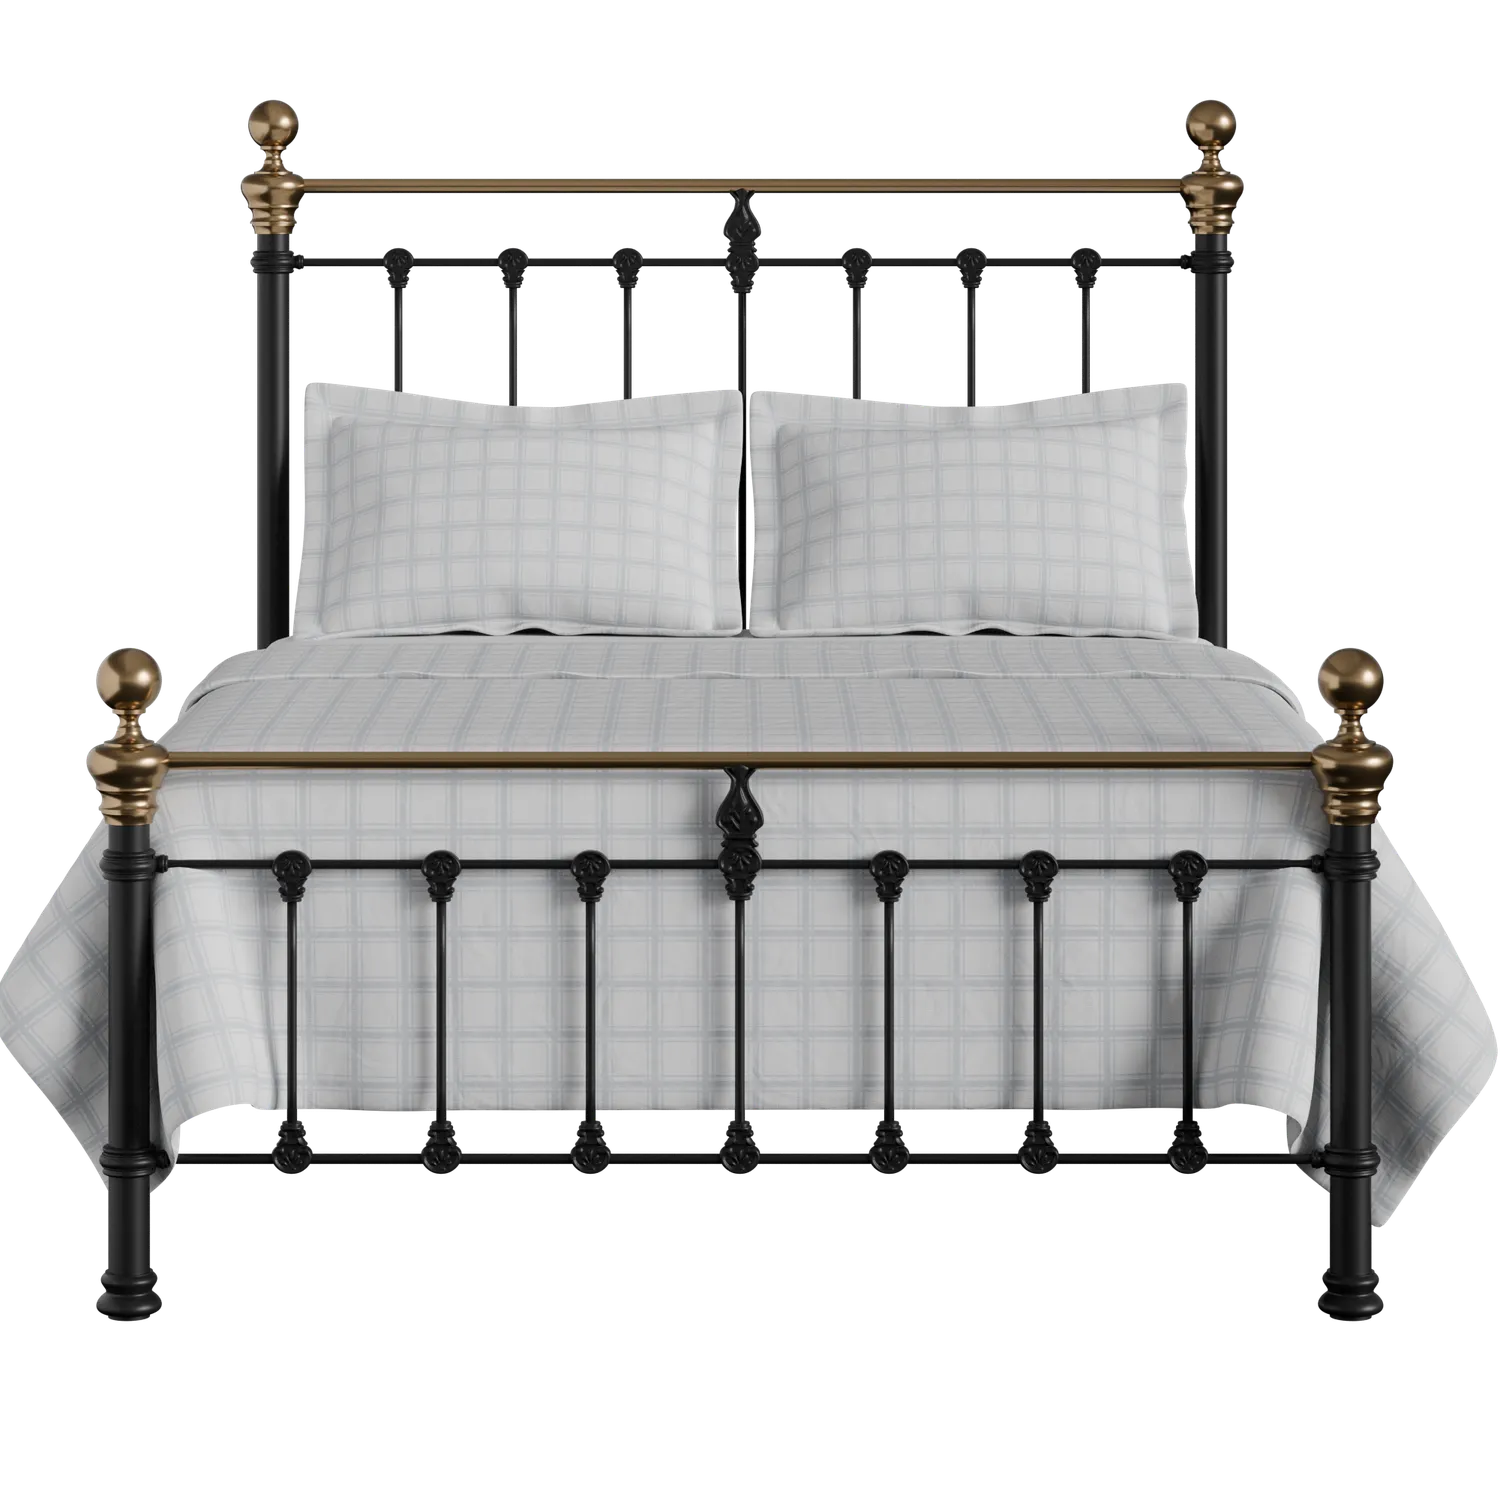 Hamilton Low Footend iron/metal bed in black